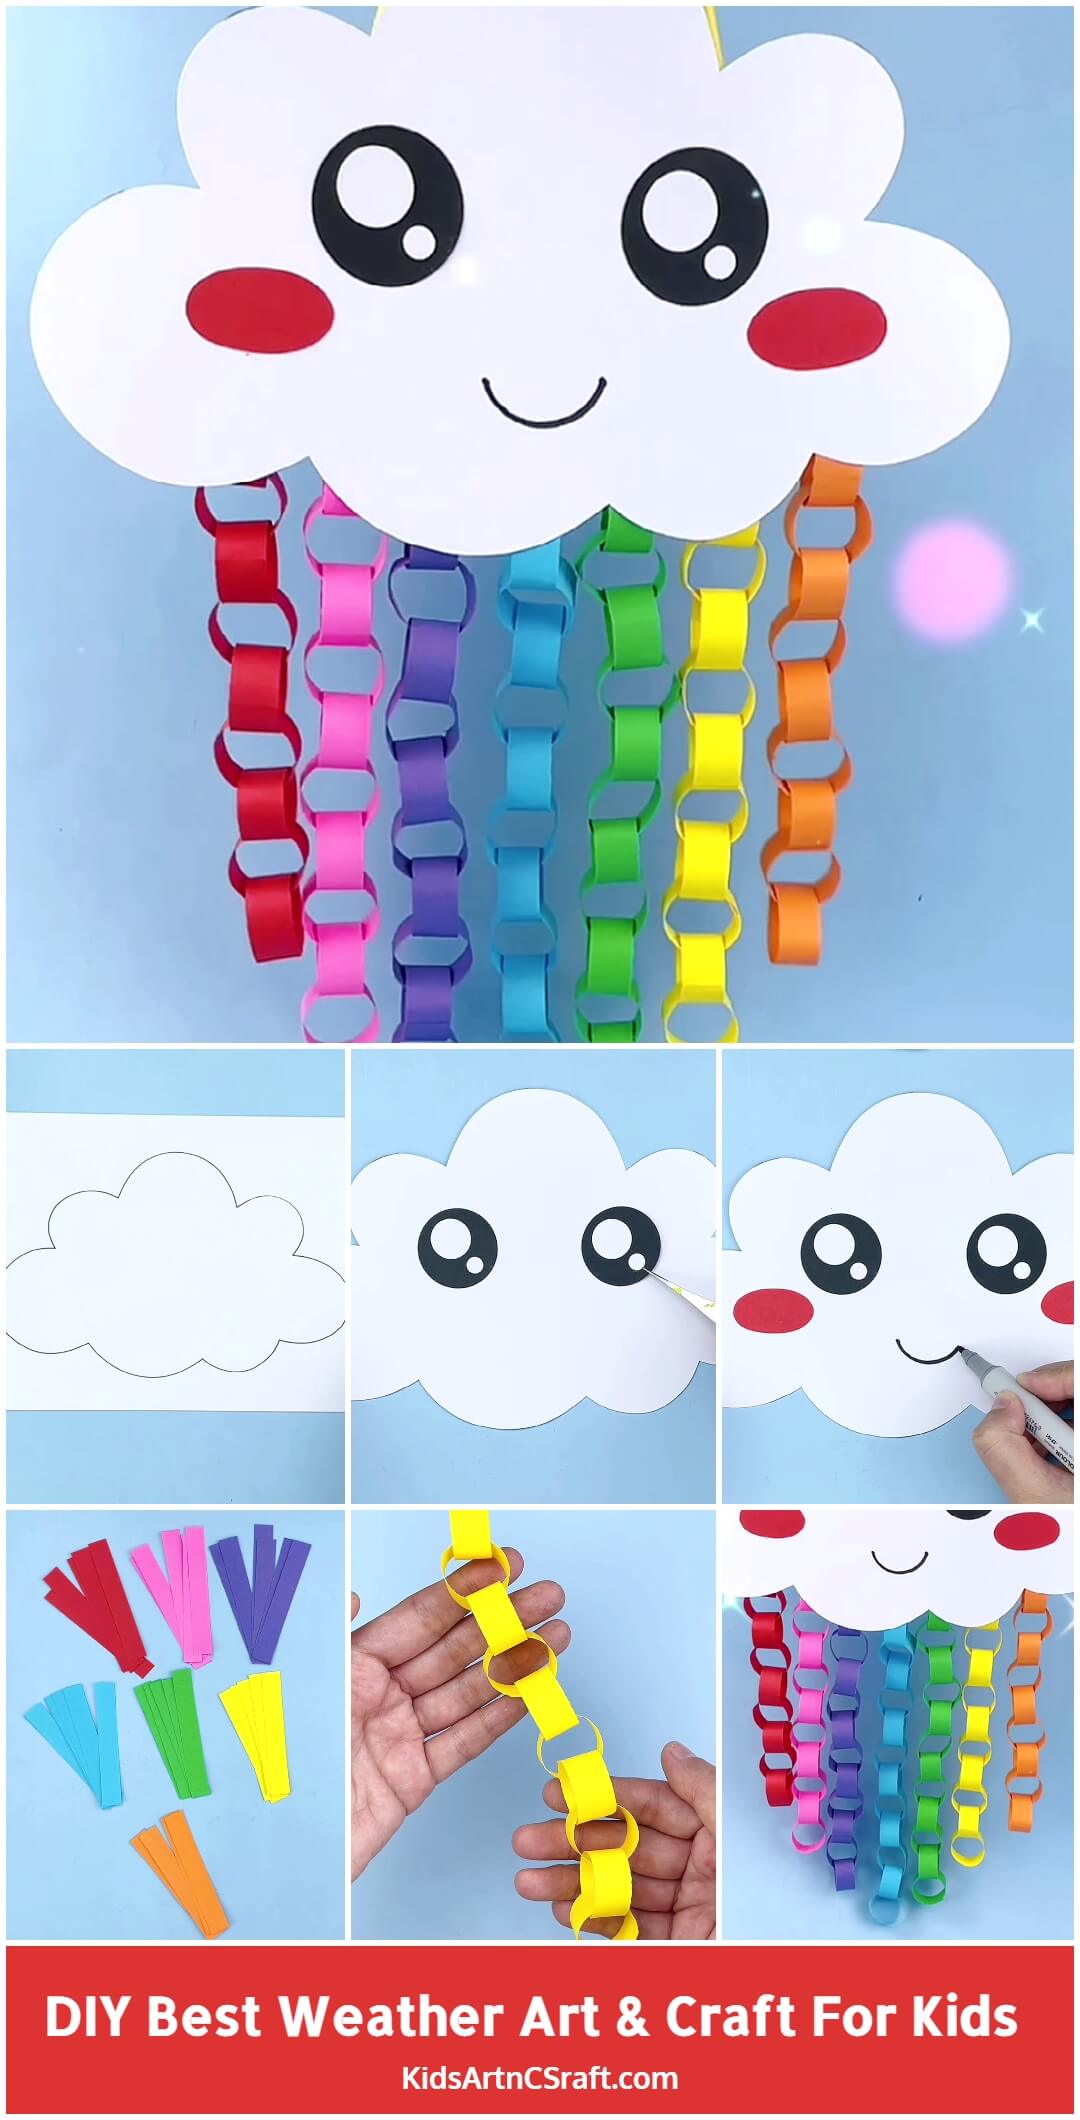 DIY The Best Weather Art & Craft For Kids Step By Step Tutorial